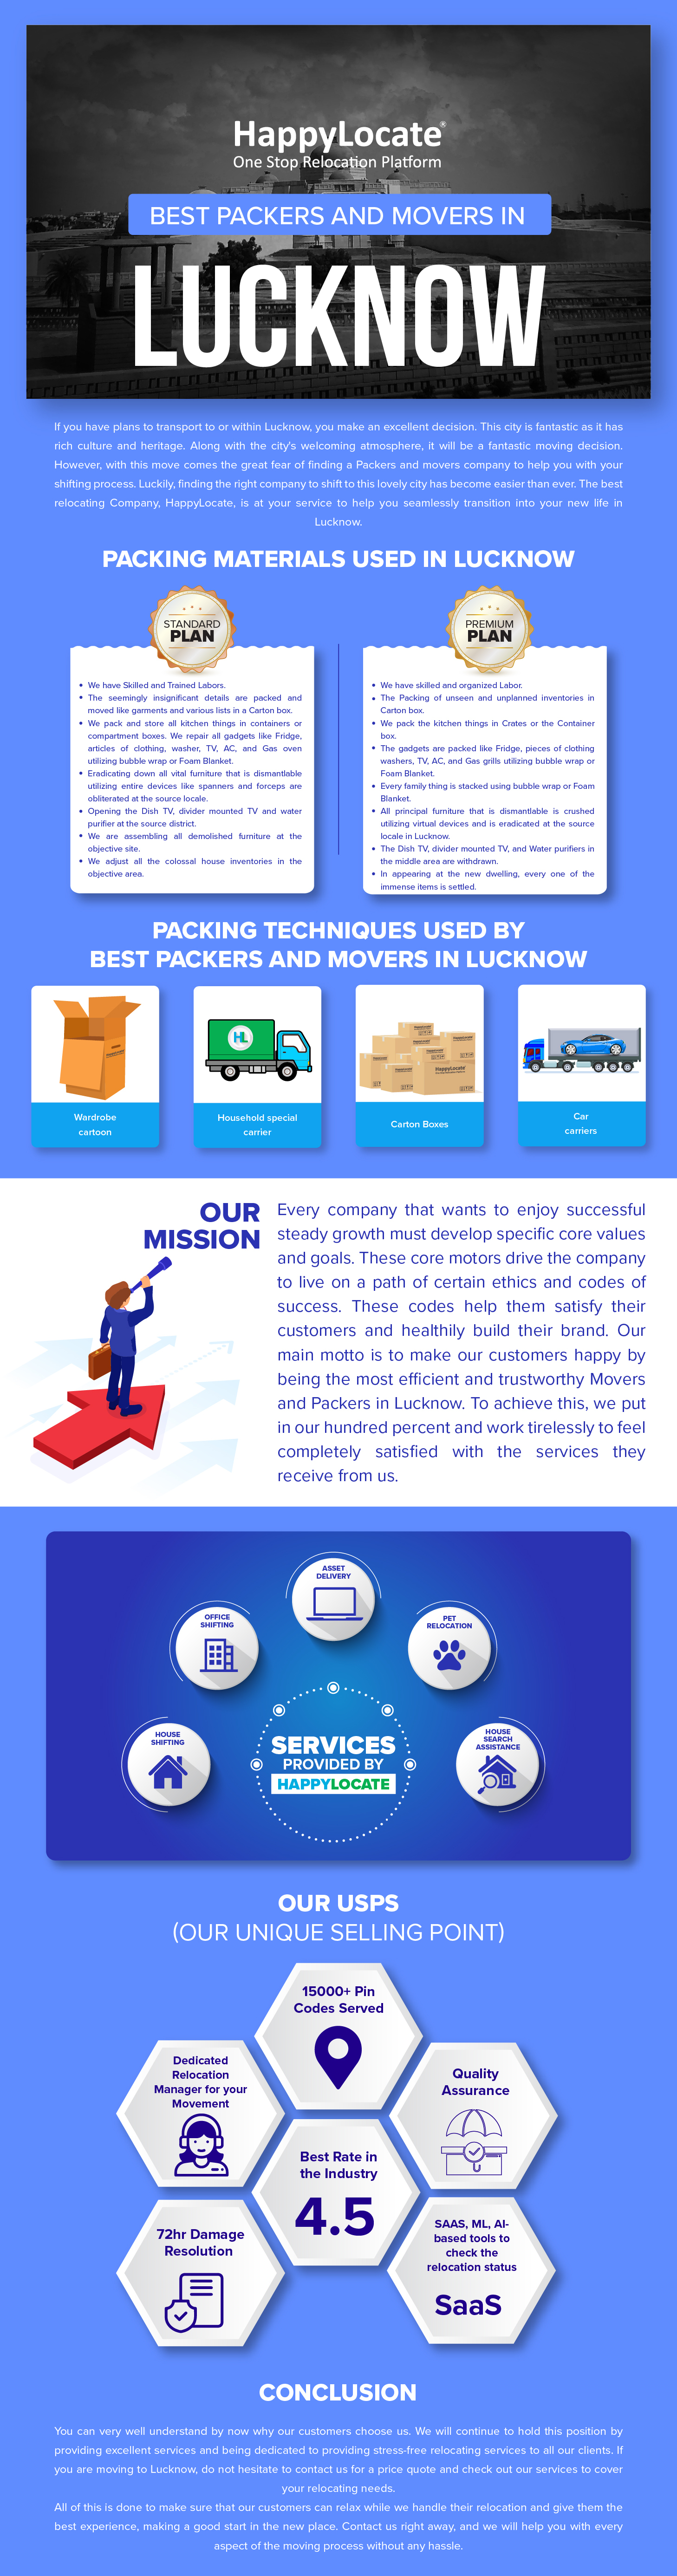 HappylLocate

One Stop Relocation Platform

BEST PACKERS AND MOVERS IN

HIRAI)

If you have plans to transport to or within Lucknow, you make an excellent decision. This city is fantastic as it has
rich culture and heritage. Along with the city's welcoming atmosphere, it will be a fantastic moving decision.
However, with this move comes the great fear of finding a Packers and movers company to help you with your
shifting process. Luckily, finding the right company to shift to this lovely city has become easier than ever. The best
relocating Company, Happylocate, is at your service to help you seamlessly transition into your new life in

Lucknow.

PACKING MATERIALS USED IN LUCKNOW

We have Skilled and Trained Labors

The seemingly nsignficant details are packed and
moved like garments and various lists in a Carton box
We pack and store all kitchen things in containers of
compartment boxes We repair all gadgets like Fridge,
articles of clothing, washer. TV, AC, and Gas oven
utilizing bubble wrap or Foam Blanket

Eradicating down all vital furndure that 1s dismantlable
utilizing entire devices like spanners and forceps are
obliterated at the source locale

Opening the Dish TV, dmder mounted TV and water
purifier at the source district

We are assembling all demolished furniture at the
objective site

We adjust all the colossal house inventories in the
objective area

We have skilled and organized Labor
The Packing of unseen and unplanned inventories in

Carton box

We pack the kitchen things in Crates or the Container
box

The gadgets are packed like Fridge, pieces of clothing
washers, TV, AC, and Gas gnlls utilizing bubble wrap or
Foam Blanket

Every family thing 1s stacked using bubble wrap or Foam
Blanket

All principal furniture that 5 dismantiable 1s crushed
utilizing virtual devices and is eradicated at the source
locale in Lucknow

The Dish TV, divider mounted TV, and Water purifiers in
the middle area are withdrawn

In appeanng at the new dwelling, every one of the

immense items is settled

 

PACKING TECHNIQUES USED BY
BEST PACKERS AND MOVERS IN LUCKNOW

 

(VEIT EEL RE] Car
) Carton Boxes :
cartoon carrier carners

OUR Every company that wants to enjoy successful
MISSION steady growth must develop specific core values
A and goals. These core motors drive the company

to live on a path of certain ethics and codes of
success. These codes help them satisfy their
customers and healthily build their brand. Our
main motto is to make our customers happy by
being the most efficient and trustworthy Movers
and Packers in Lucknow. To achieve this, we put
in our hundred percent and work tirelessly to feel
completely satisfied with the services they
receive from us.

 

RO

E1514" [ed 3-0 assistance
® PROVIDEDBY ® 2
B B 0.

 

OUR USPS
(OUR UNIQUE SELLING POINT)

15000+ Pin
Codes Served

Dedicated
Relocation Quality

Manager for your Assurance

Movement TX
Best Rate in ST
the Industry

a5 Je...

72hr Damage based tools to
Resolution check the
relocation status

   
 

   
     
  
 

©) Saas

CONCLUSION

You can very well understand by now why our customers choose us. We will continue to hold this position by

providing excellent services and being dedicated to providing stress-free relocating services to all our clients. If

you are moving to Lucknow, do not hesitate to contact us for a price quote and check out our services to cover
your relocating needs.

All of this is done to make sure that our customers can relax while we handle their relocation and give them the

best experience, making a good start in the new place. Contact us right away, and we will help you with every

aspect of the moving process without any hassle.